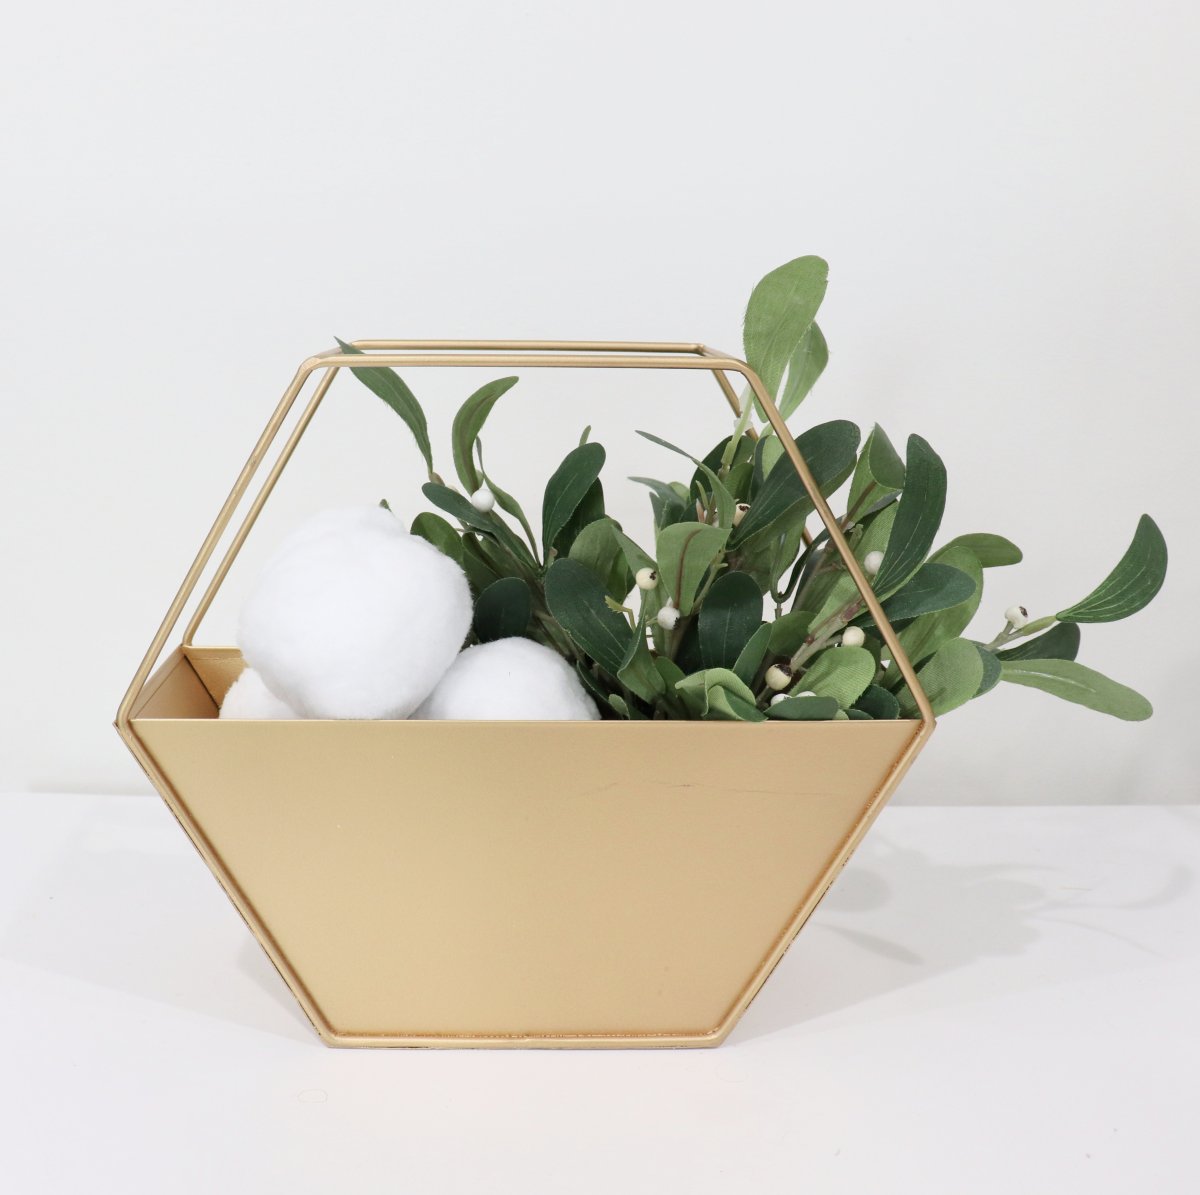 Image contains a hexagonal gold container with mistletoe and large snowballs.